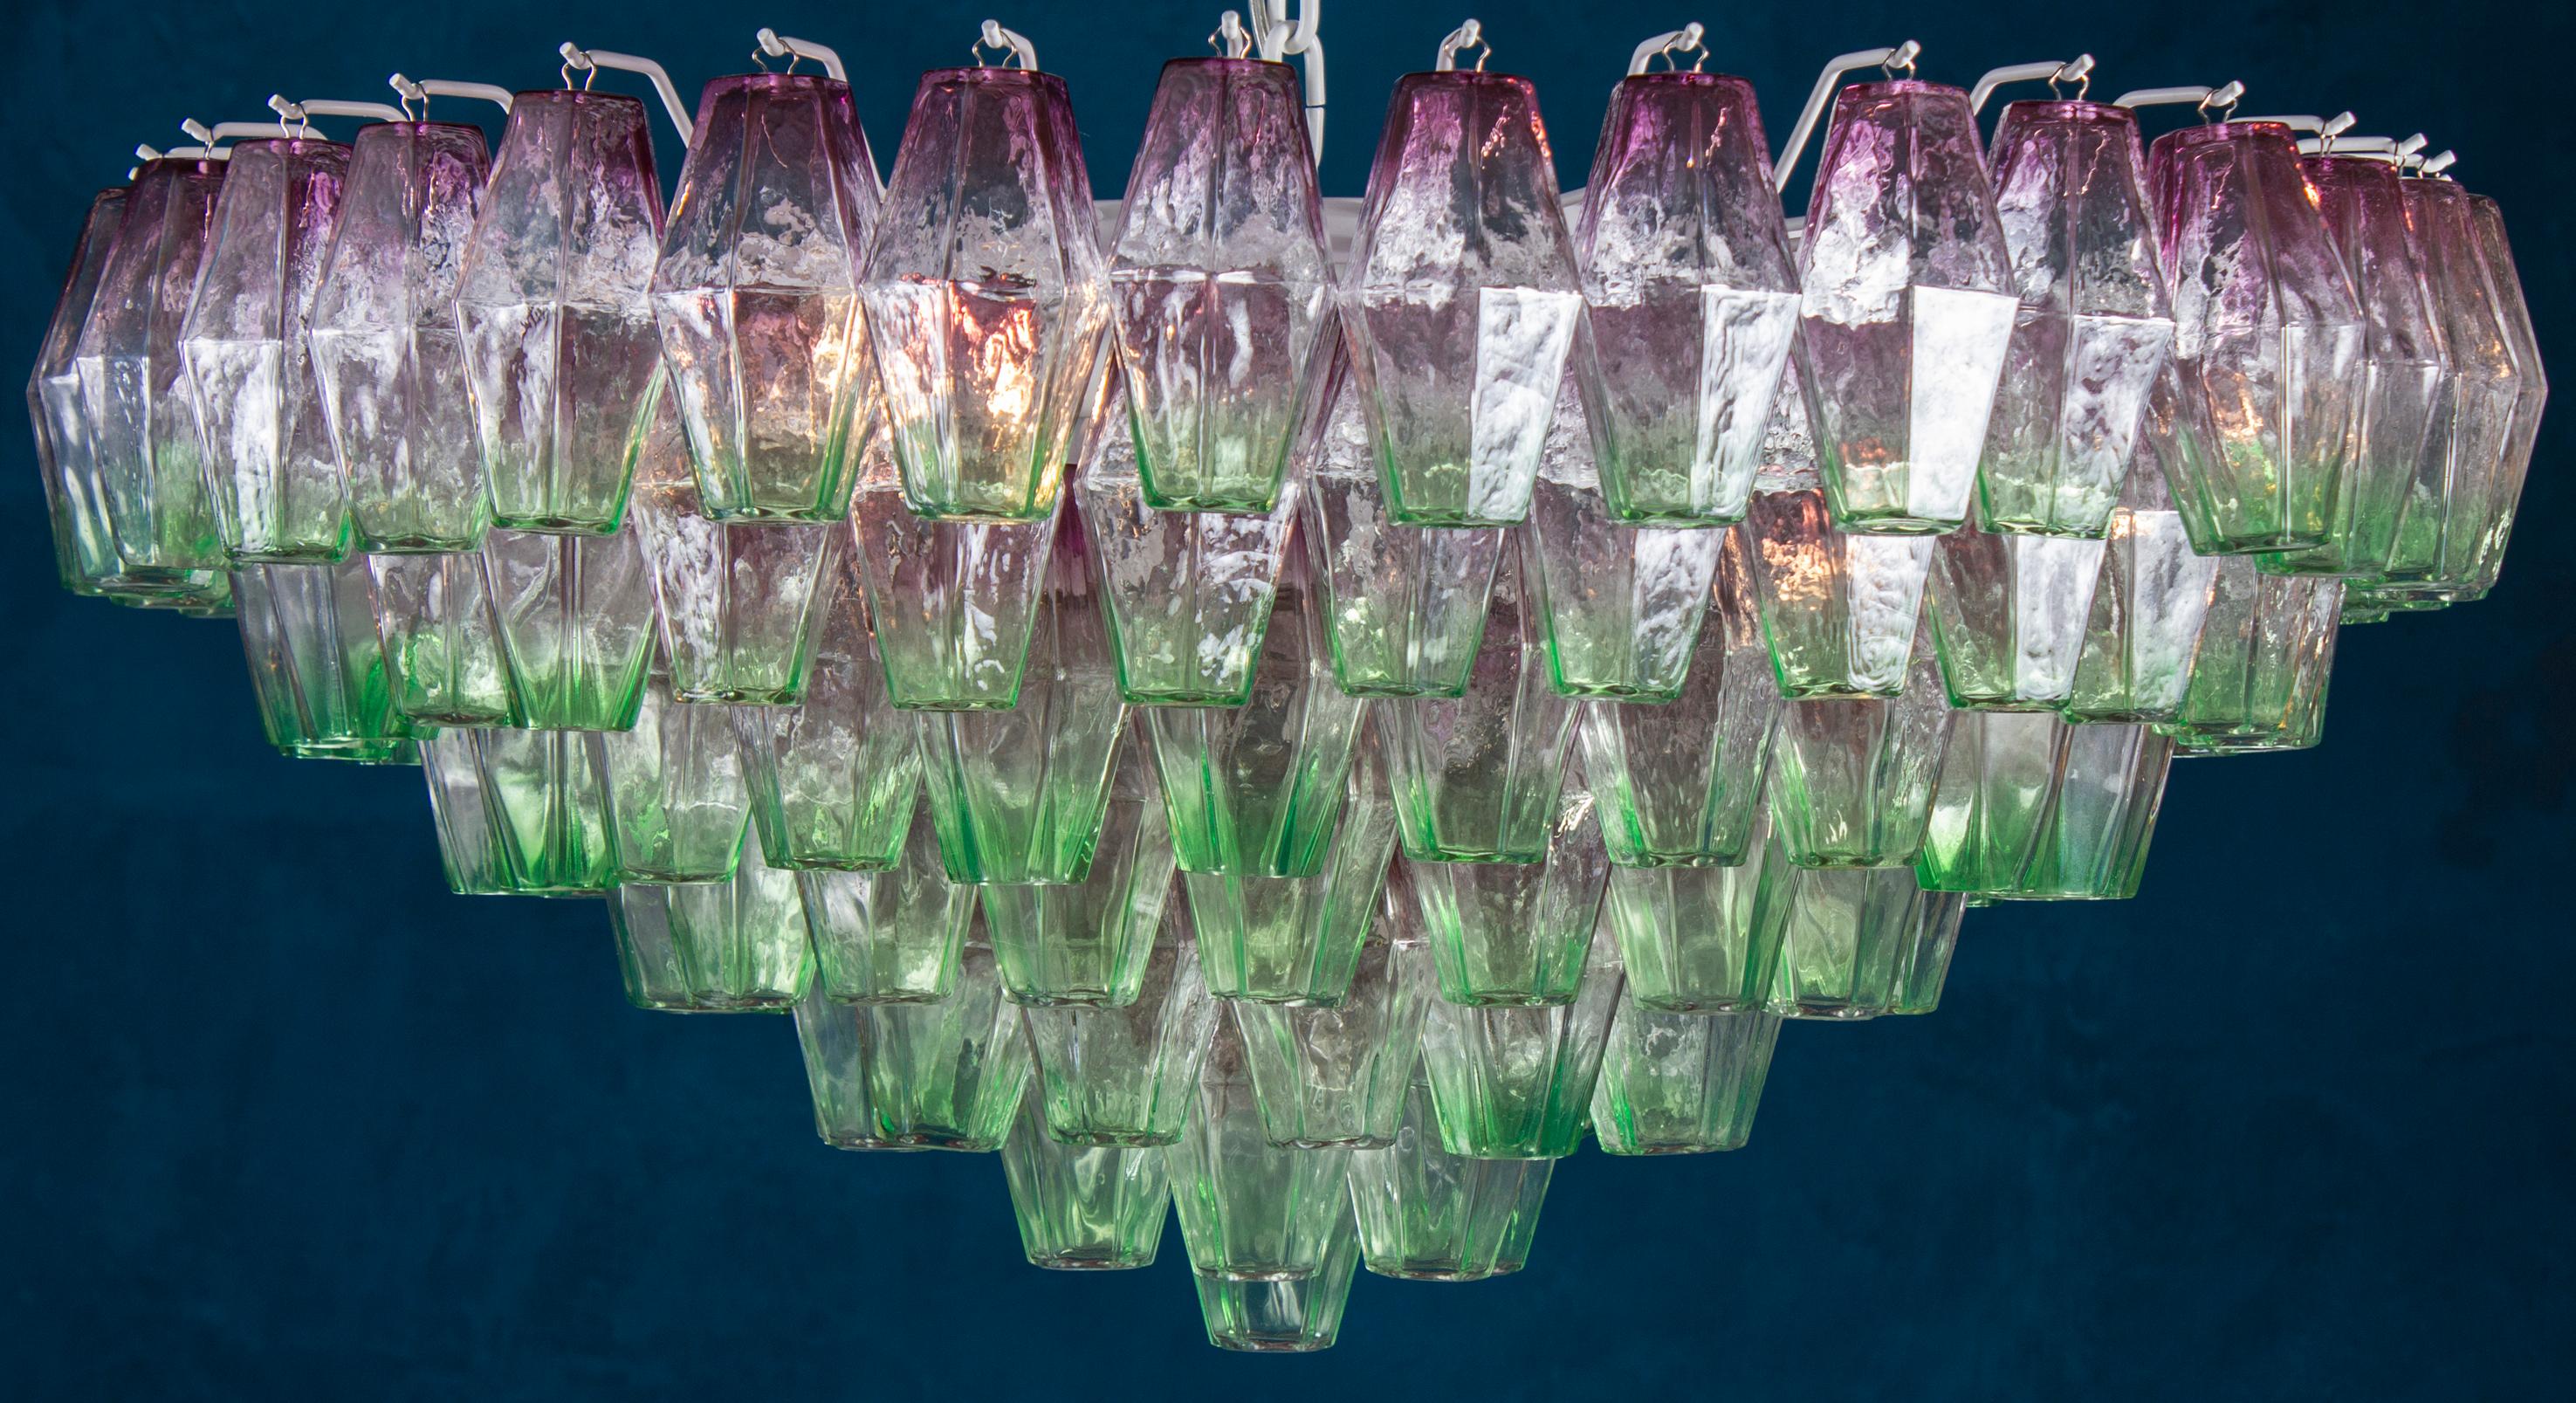 Midcentury original large Poliedri chandelier. Rare combination of pink and green colored Murano glass.
Available also the pair.
Provenance form a historic Roman Palace of the period.